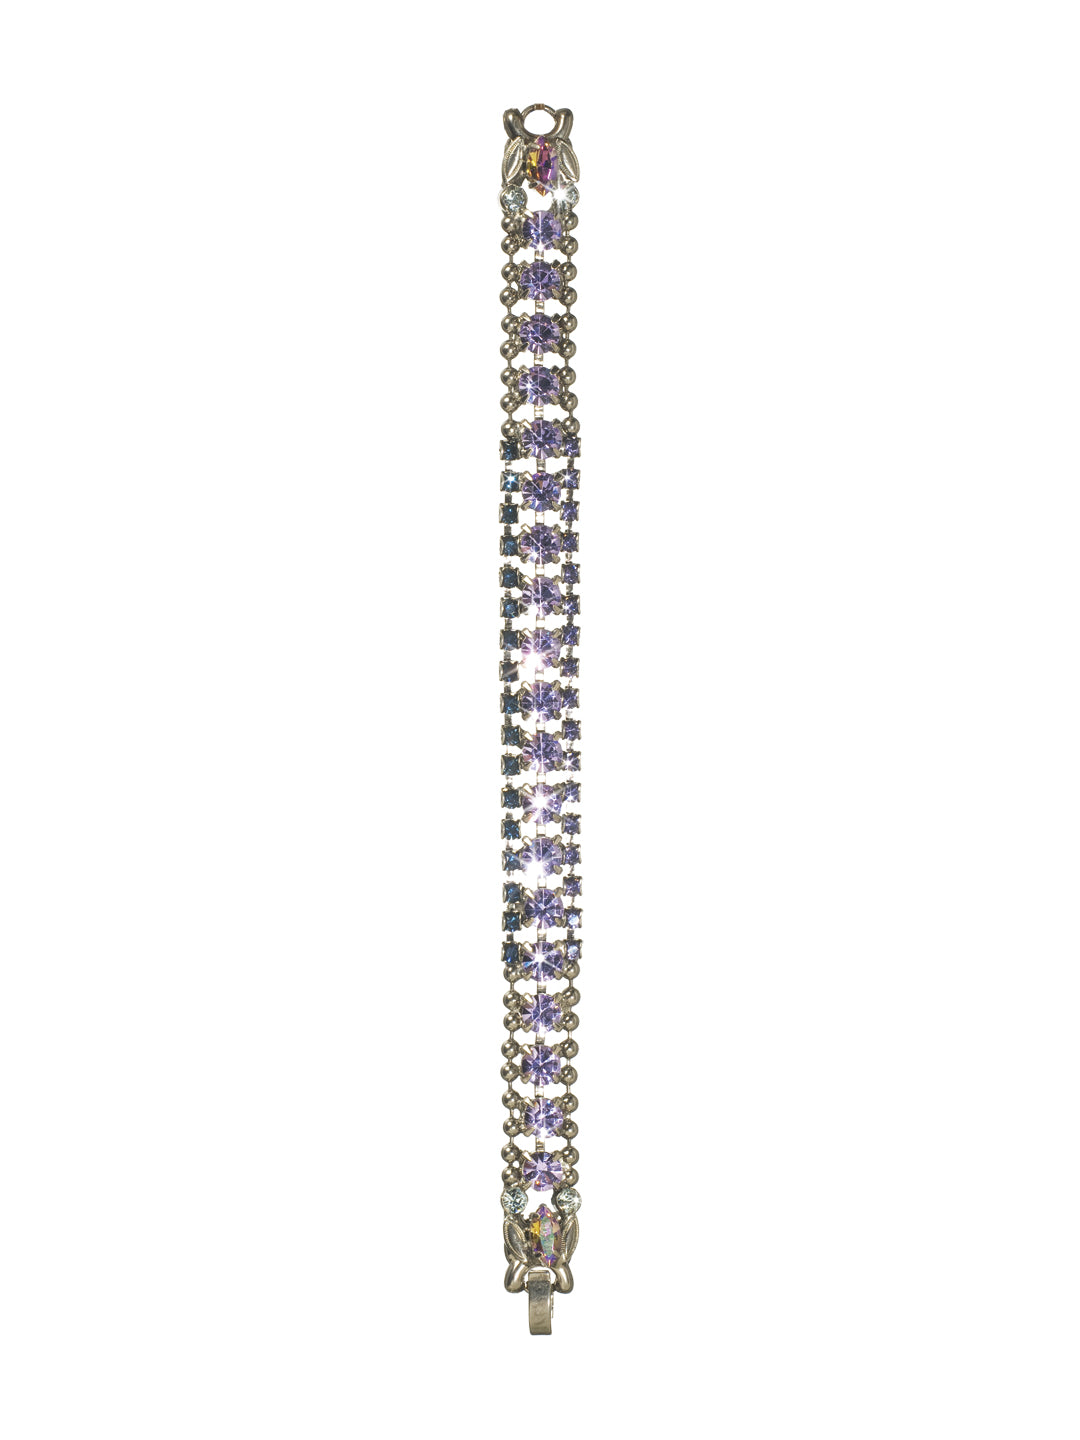 Right on Track Tennis Bracelet - BCN5ASHY - Who doesn't want a little extra dose of fabulous? Go ahead, indulge yourself! Three rows of crystals are sure to keep you sparkling and stunning no matter what your style. From Sorrelli's Hydrangea collection in our Antique Silver-tone finish.